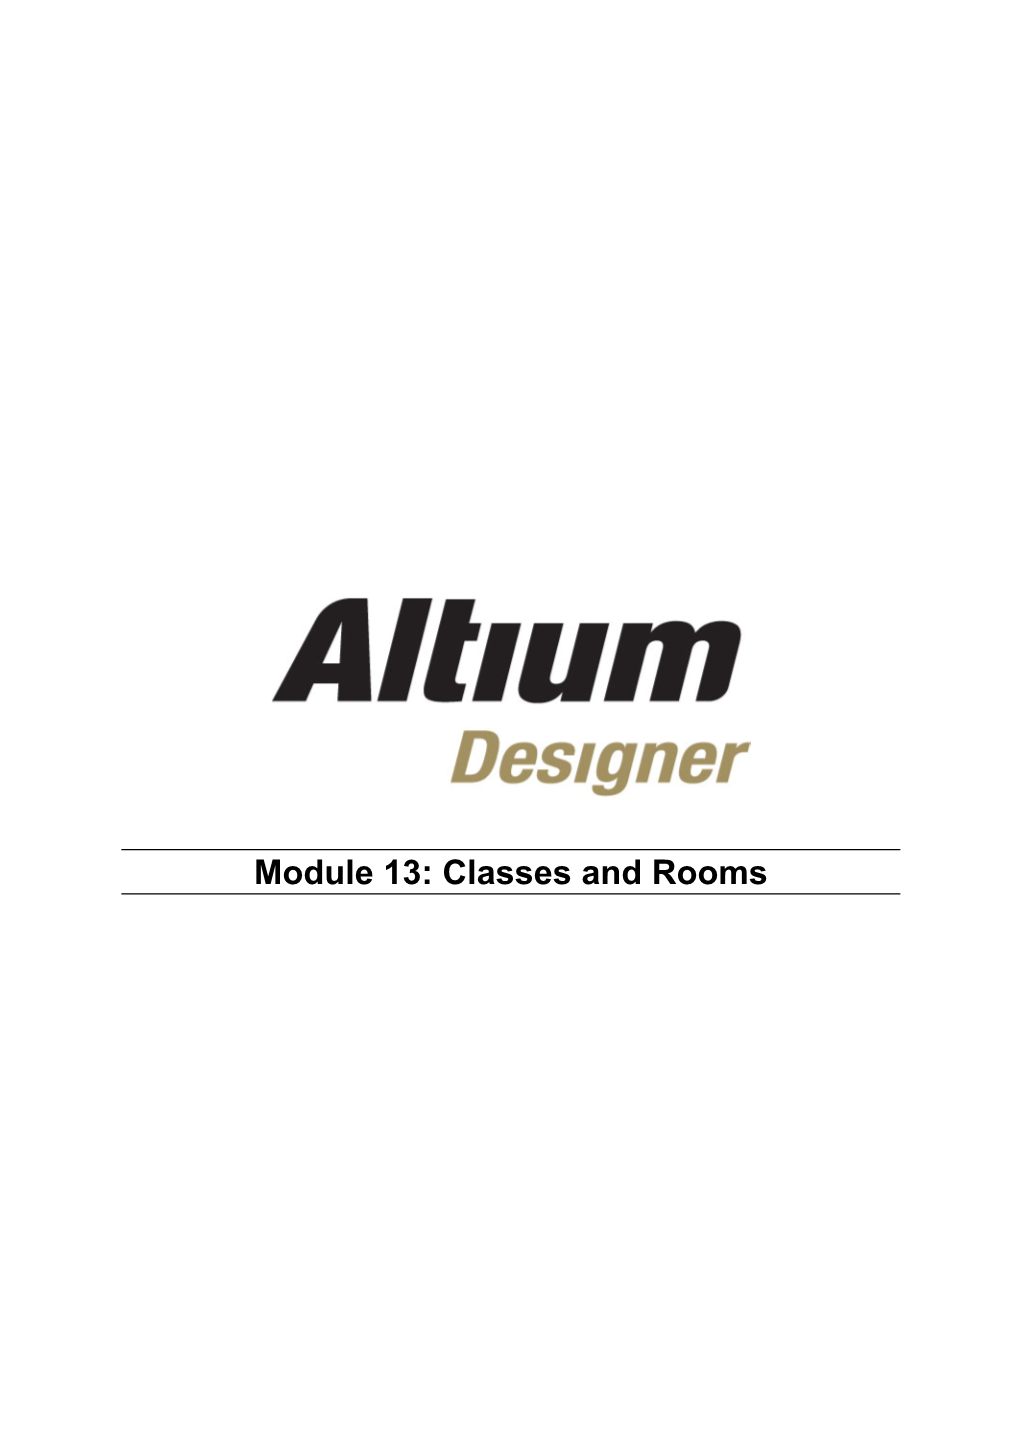 Module 13: Classes and Rooms